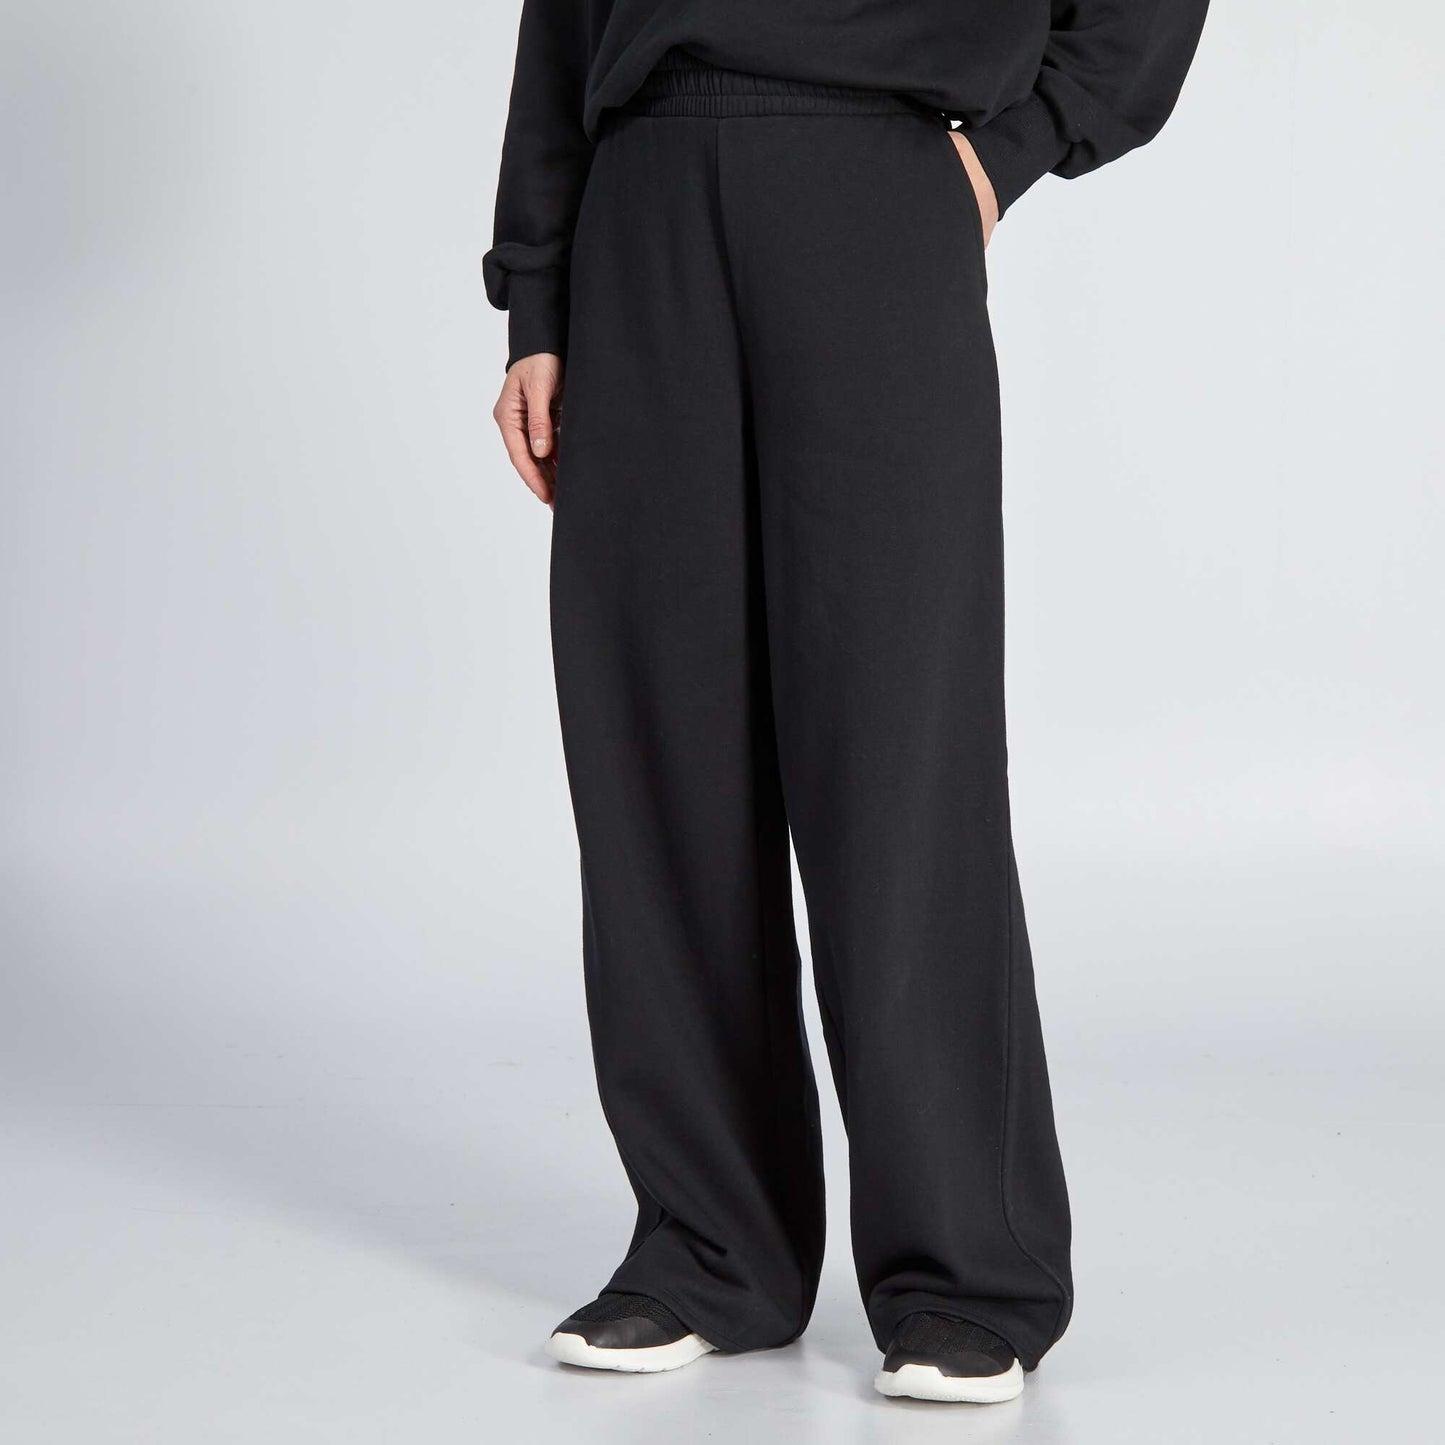 Loose-fitting joggers black